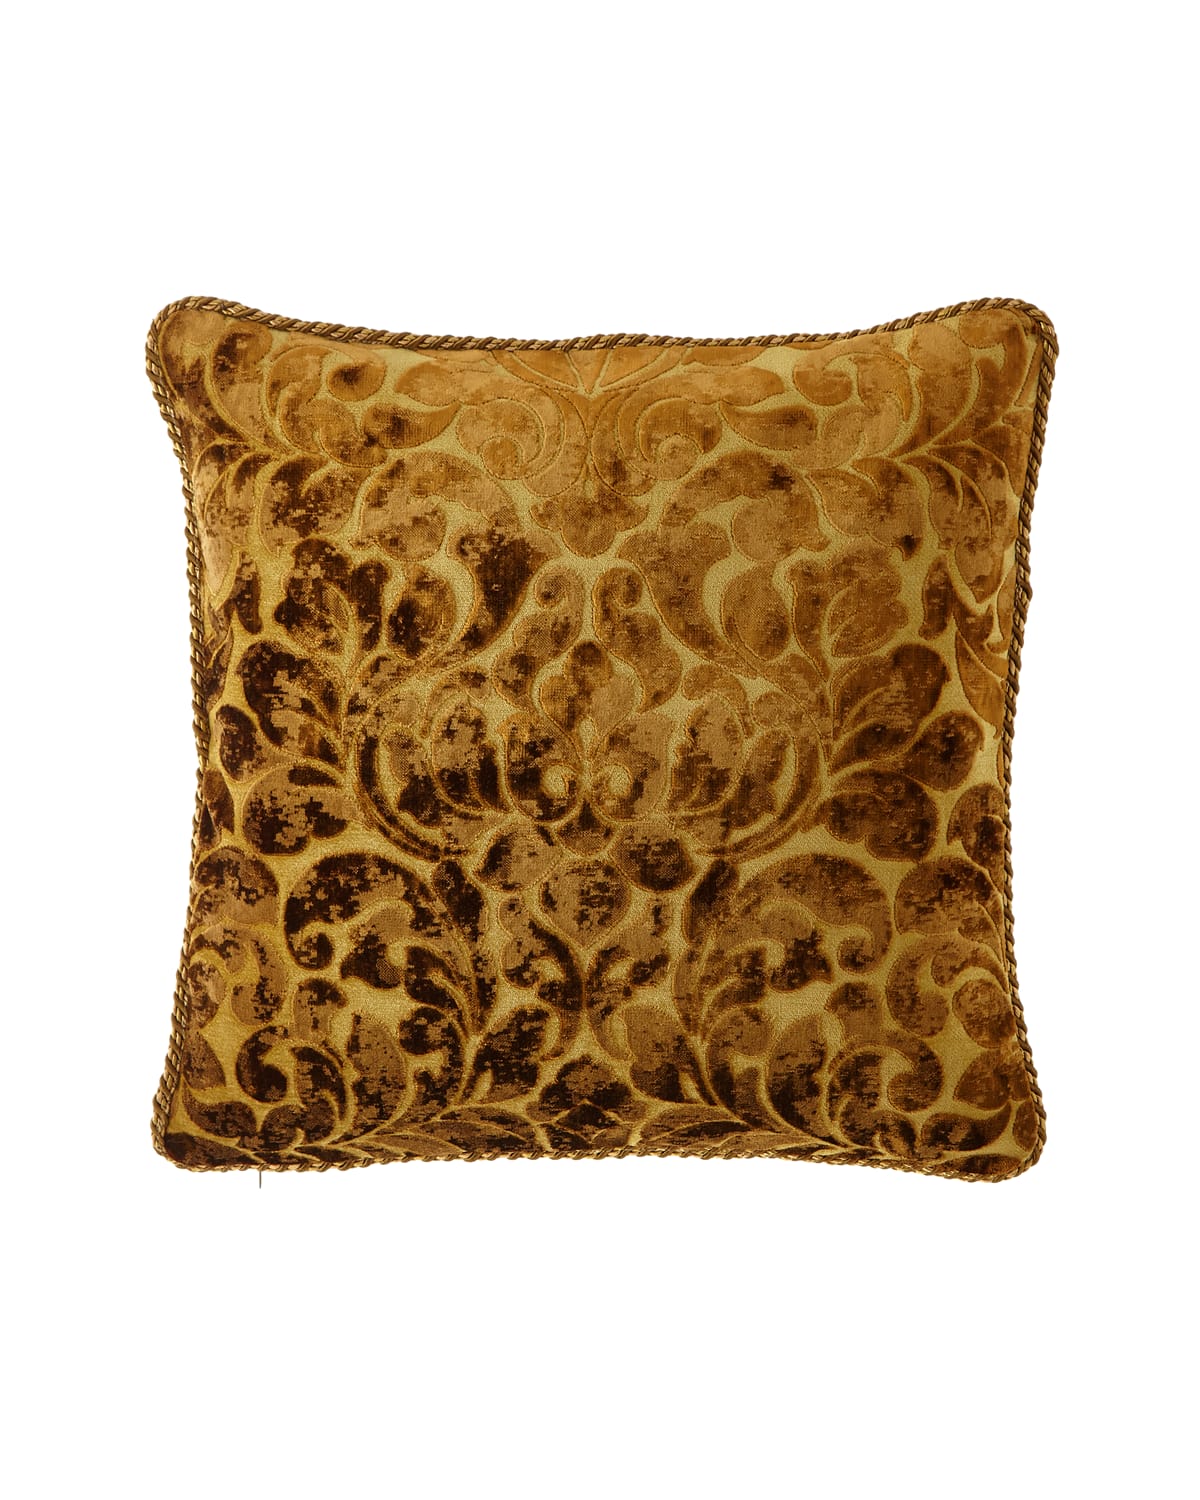 Image Austin Horn Collection Luxe Pillow